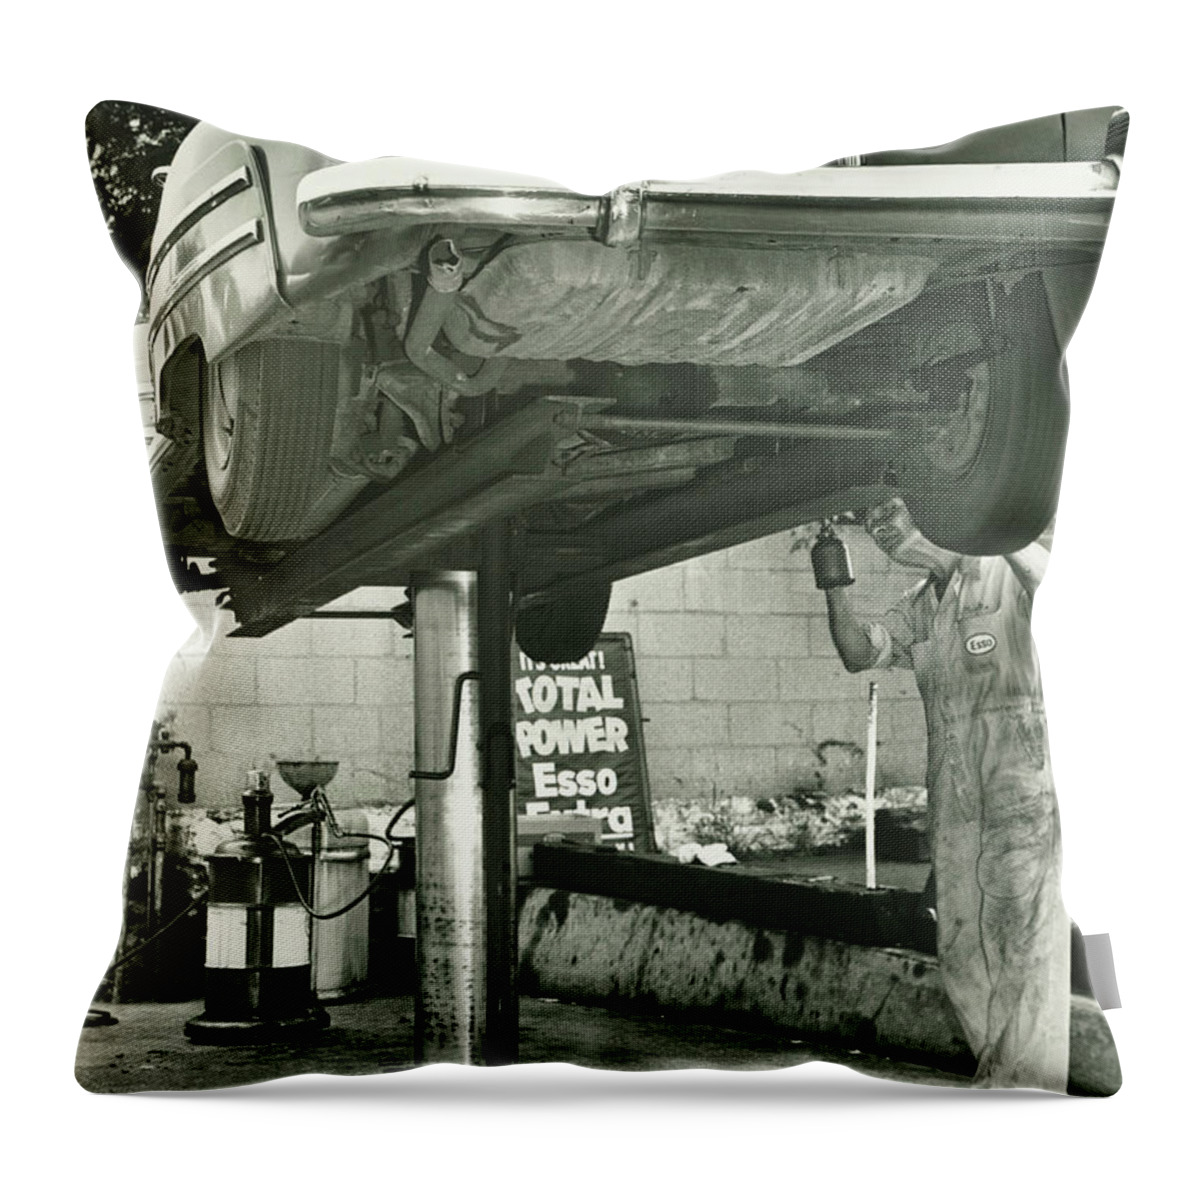 One Man Only Throw Pillow featuring the photograph Man Repairing Uplifted Car, B&w, Low by George Marks